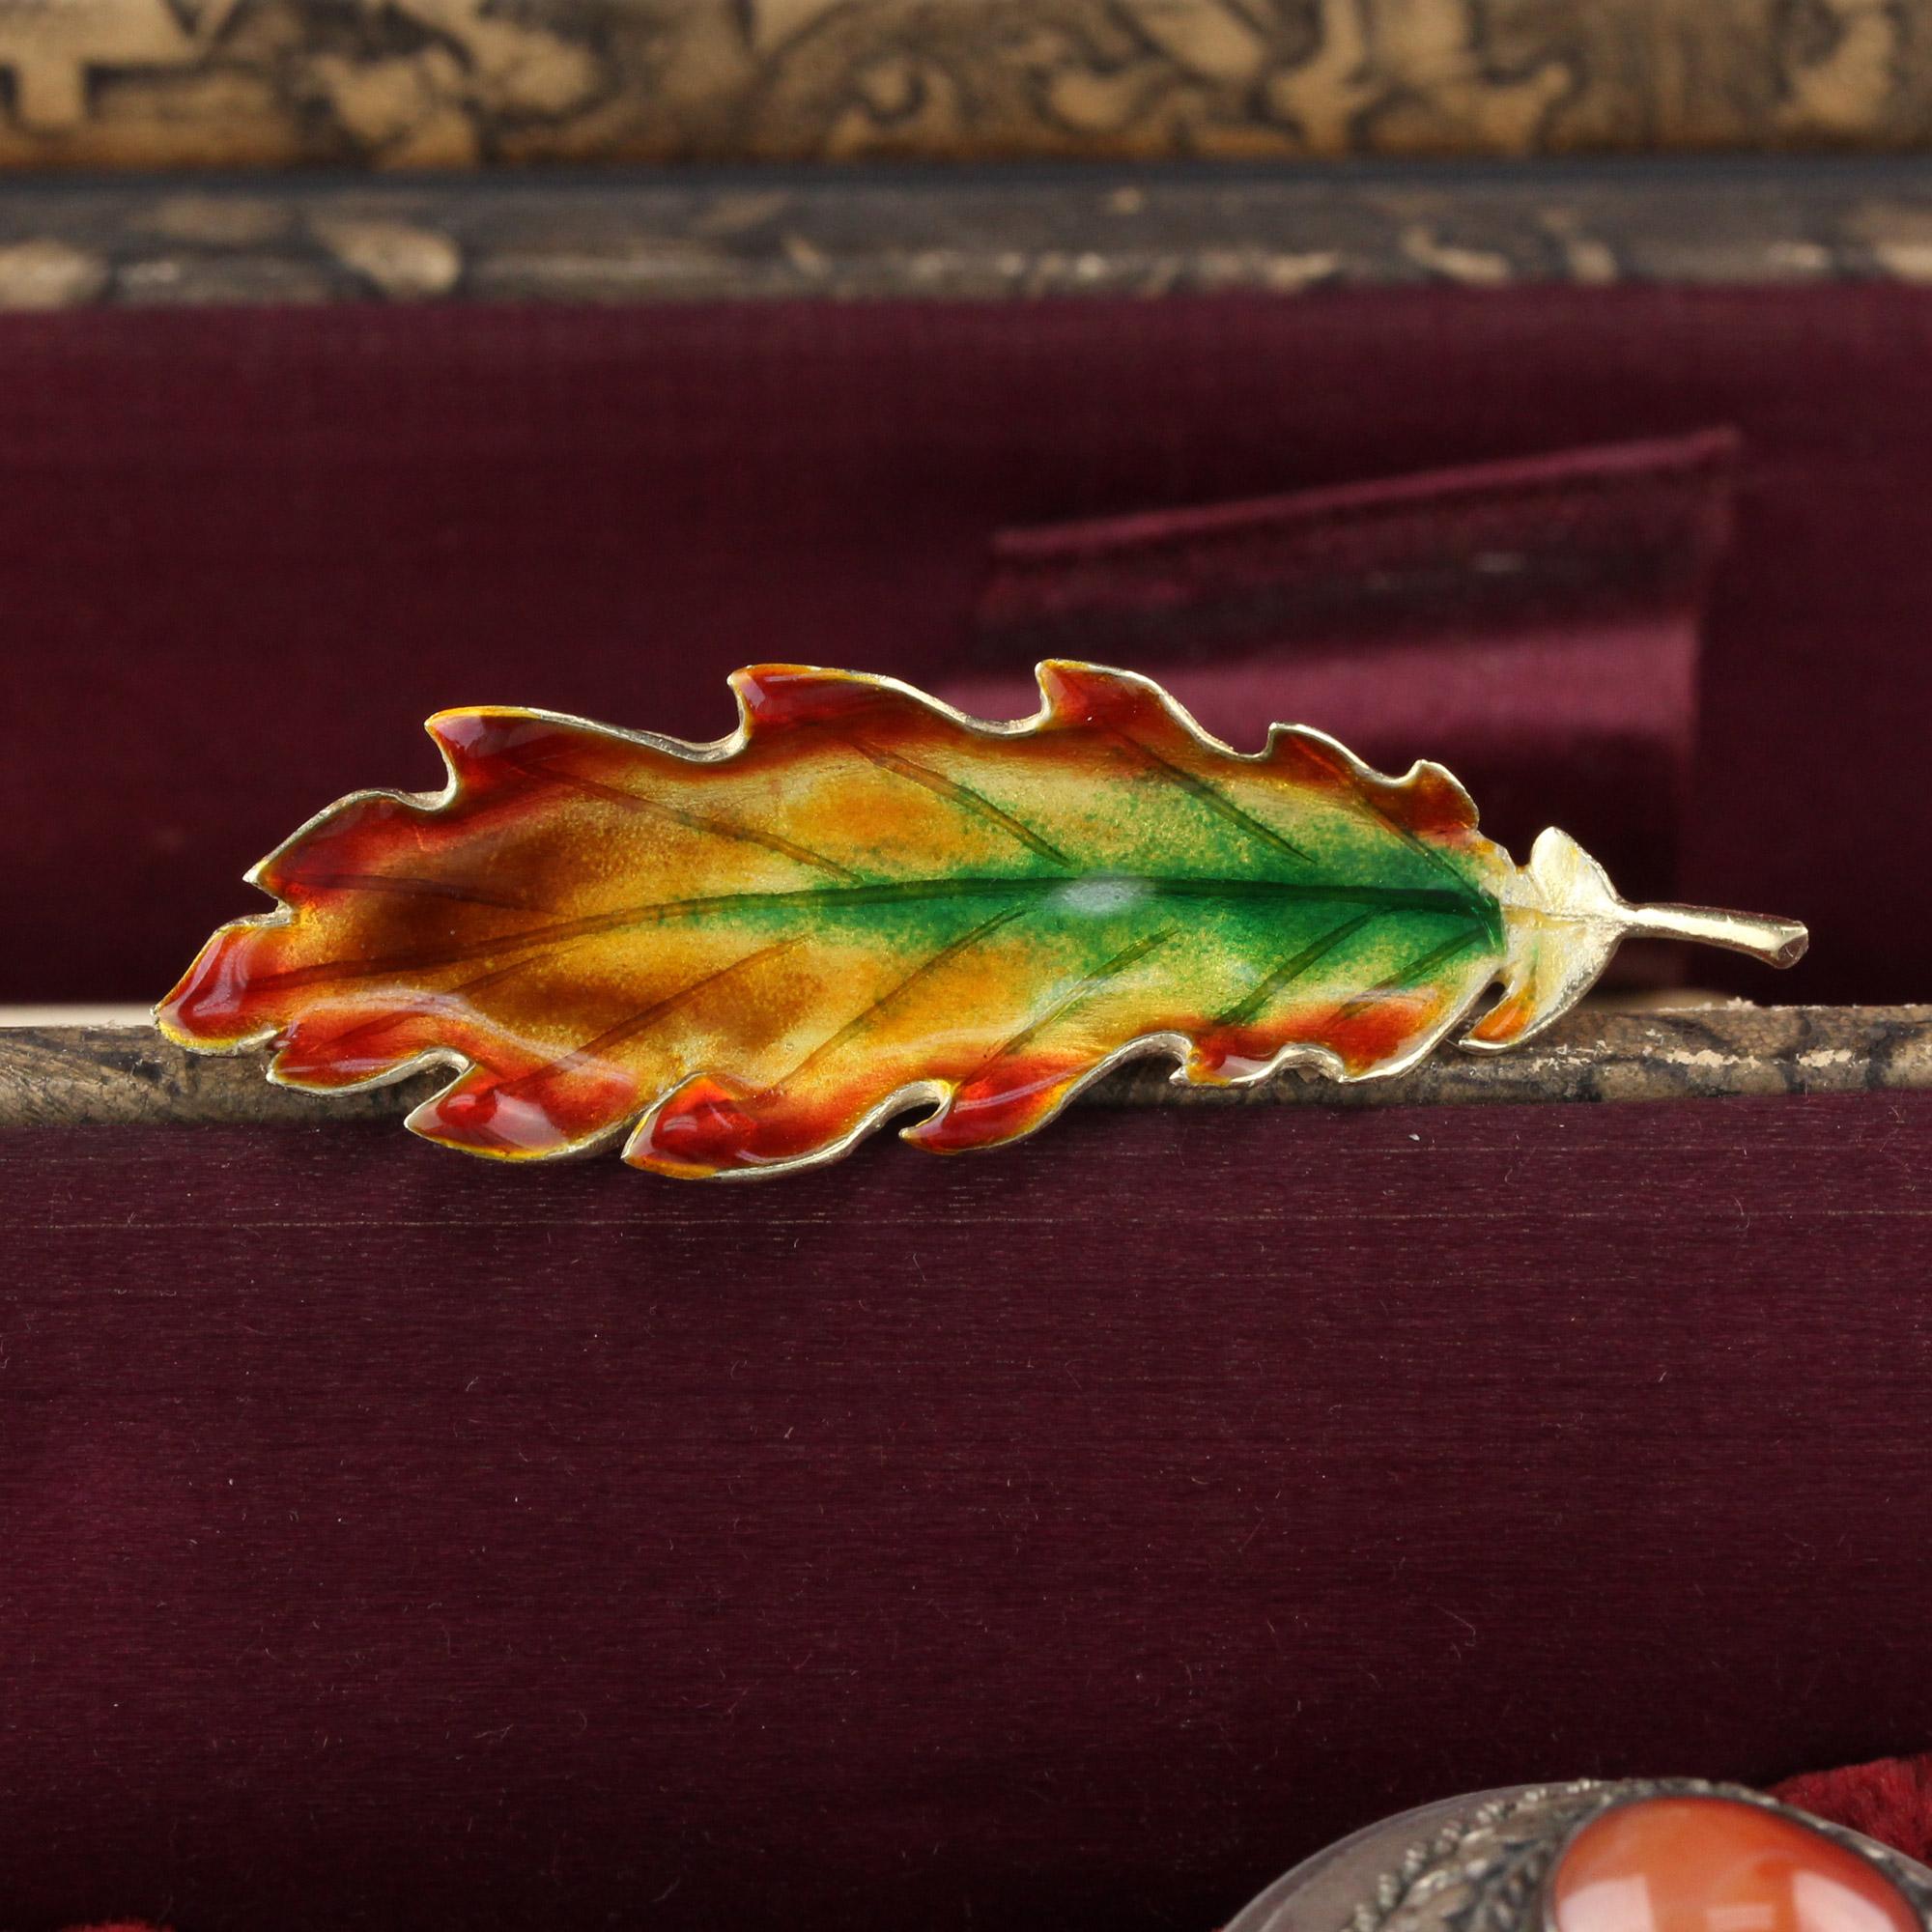 Beautiful plique a jour enamel leaf brooch in 14K yellow gold with vibrant colors. 

Metal: 14K Yellow Gold

Weight: 9.2 Grams 

Measurements: 60mm wide x 19mm tall